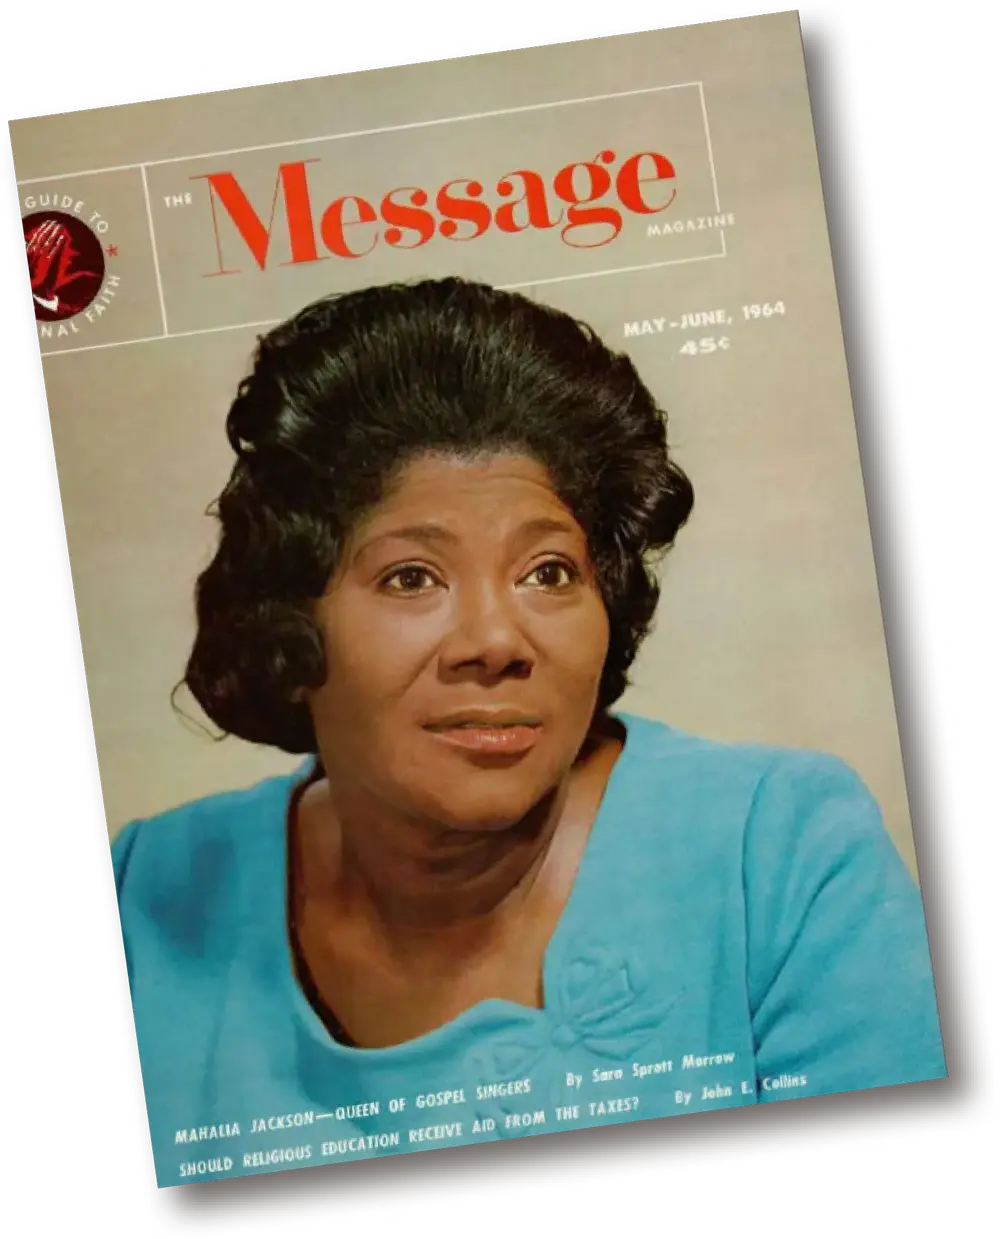 May/June 1964 issue cover of Message Magazine featuring "Mahalia Jackson–Queen of Gospel Singers"